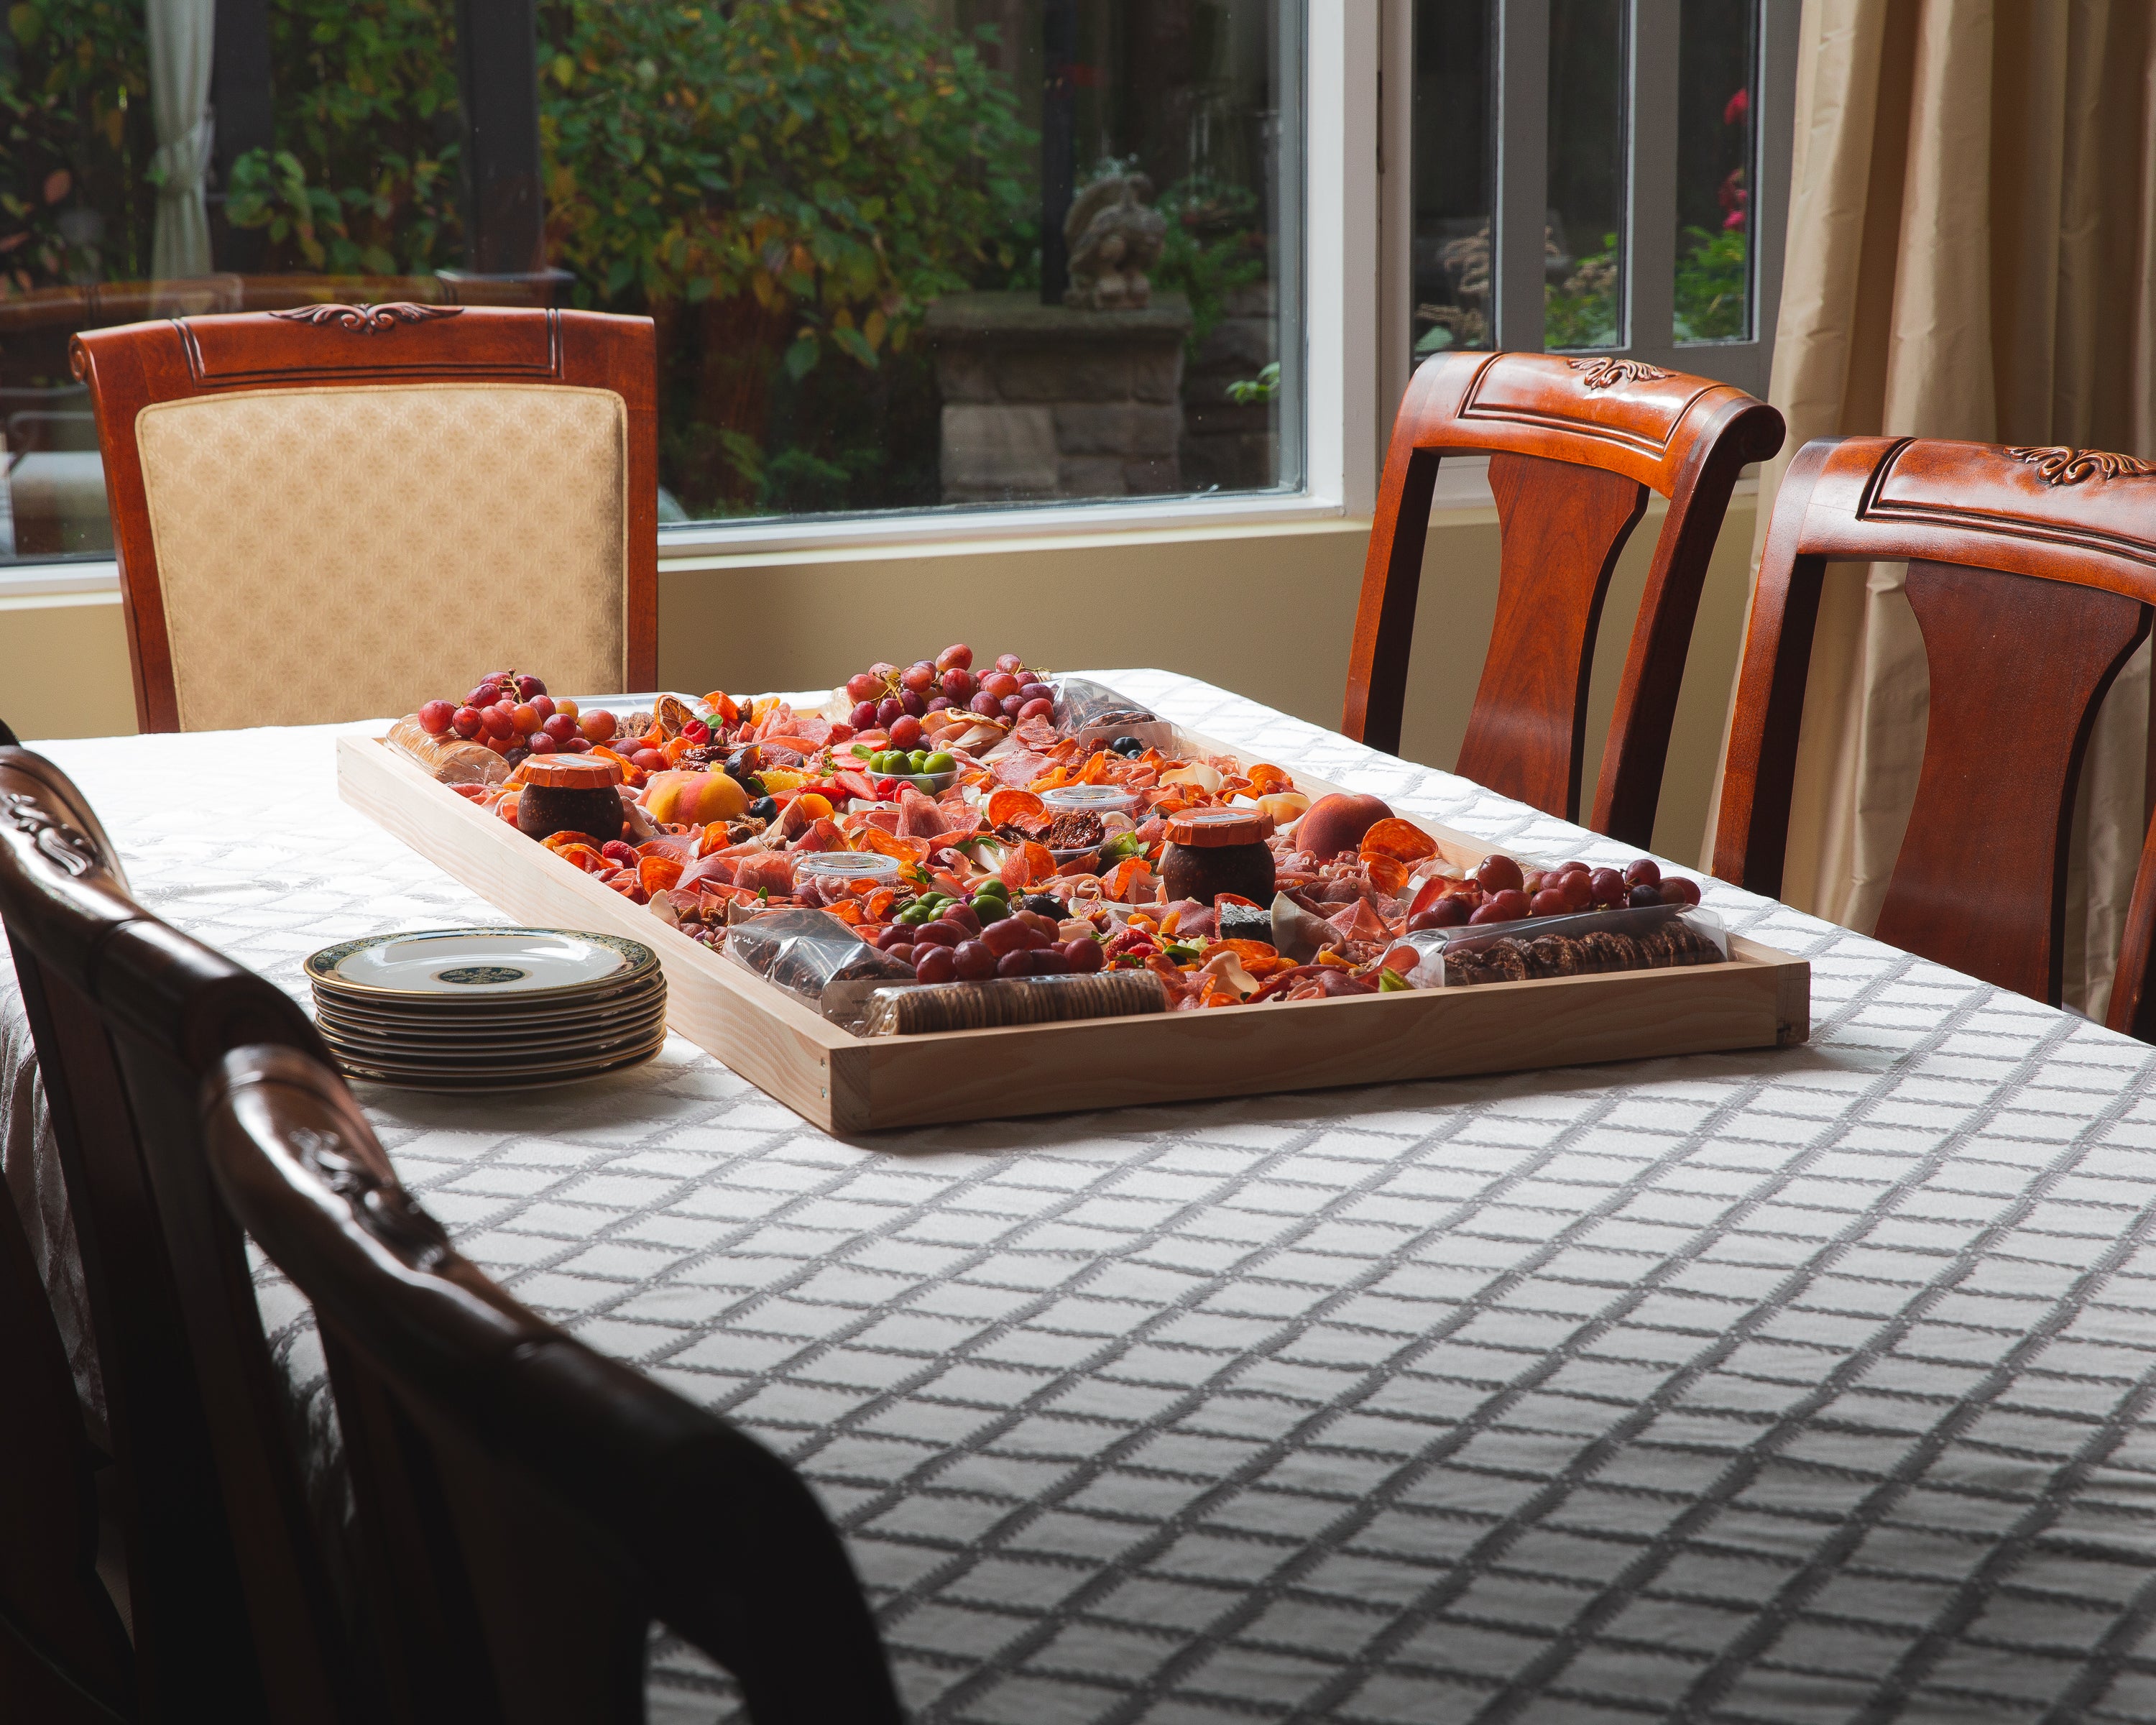 Introducing The Luxe Grande Ultimate Charcuterie Board: Our largest charcuterie board ever.